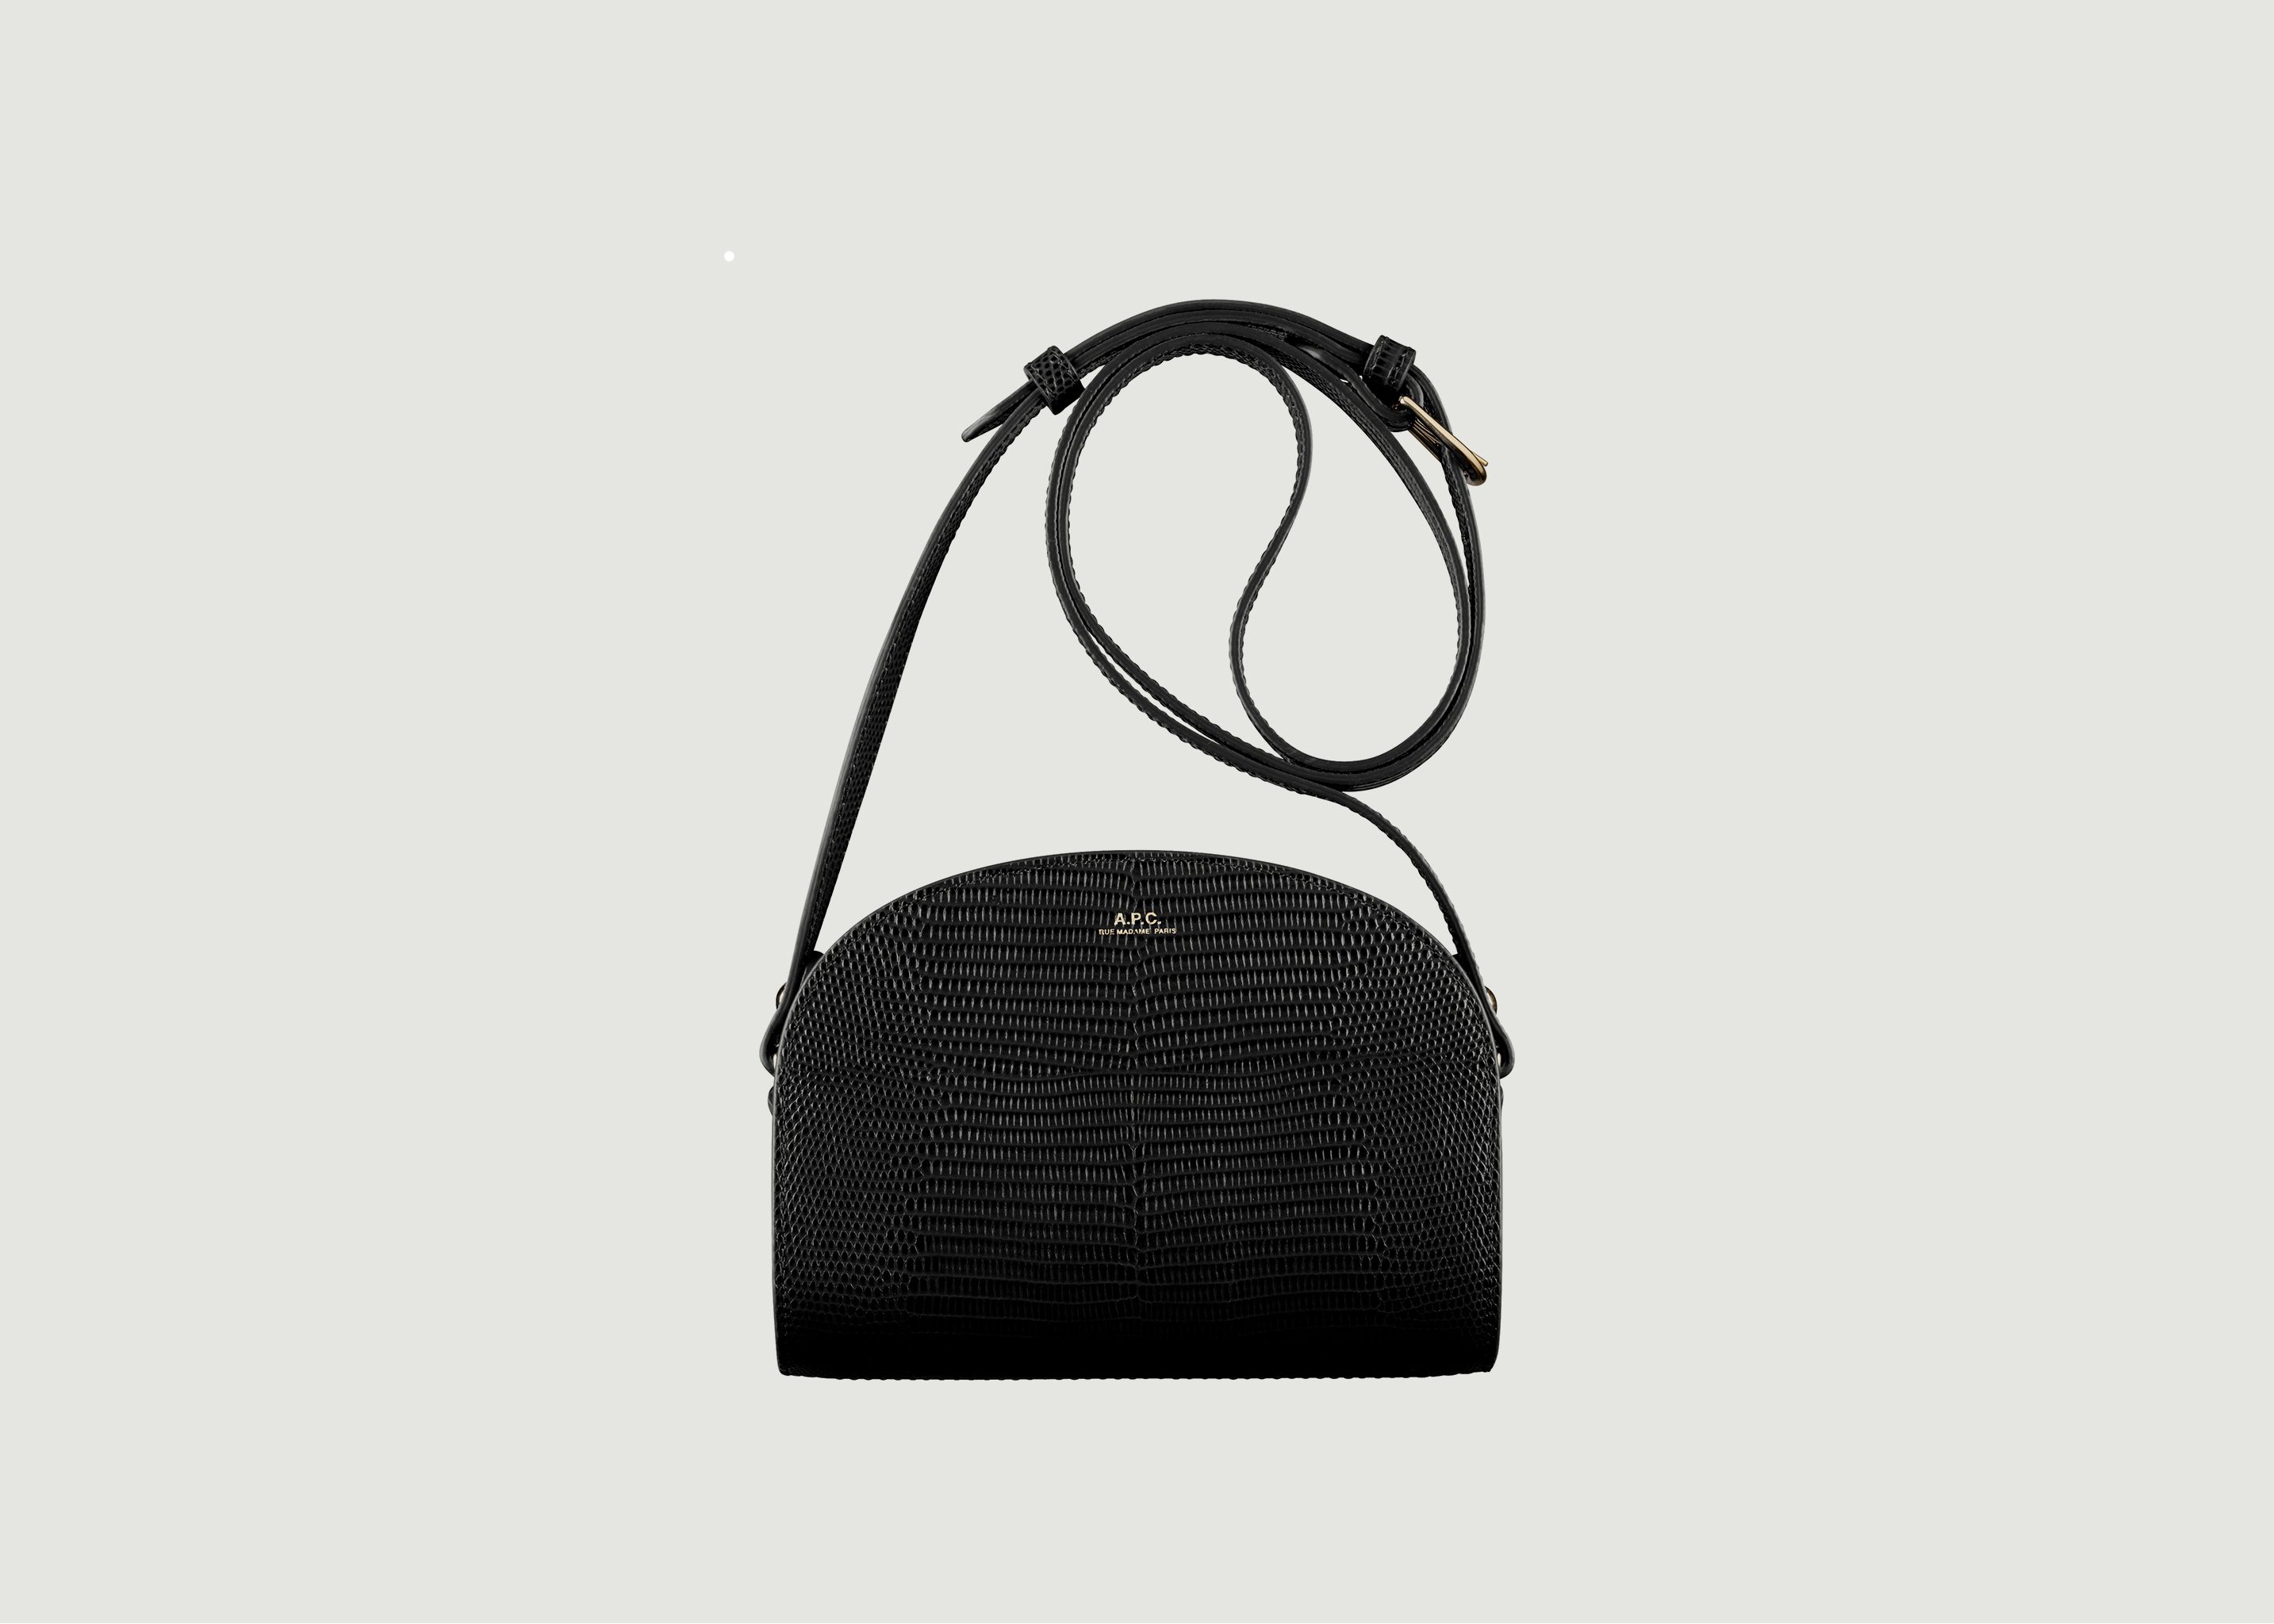 A.P.C's Demi Lune is the Designer Bag I Carry All the Time